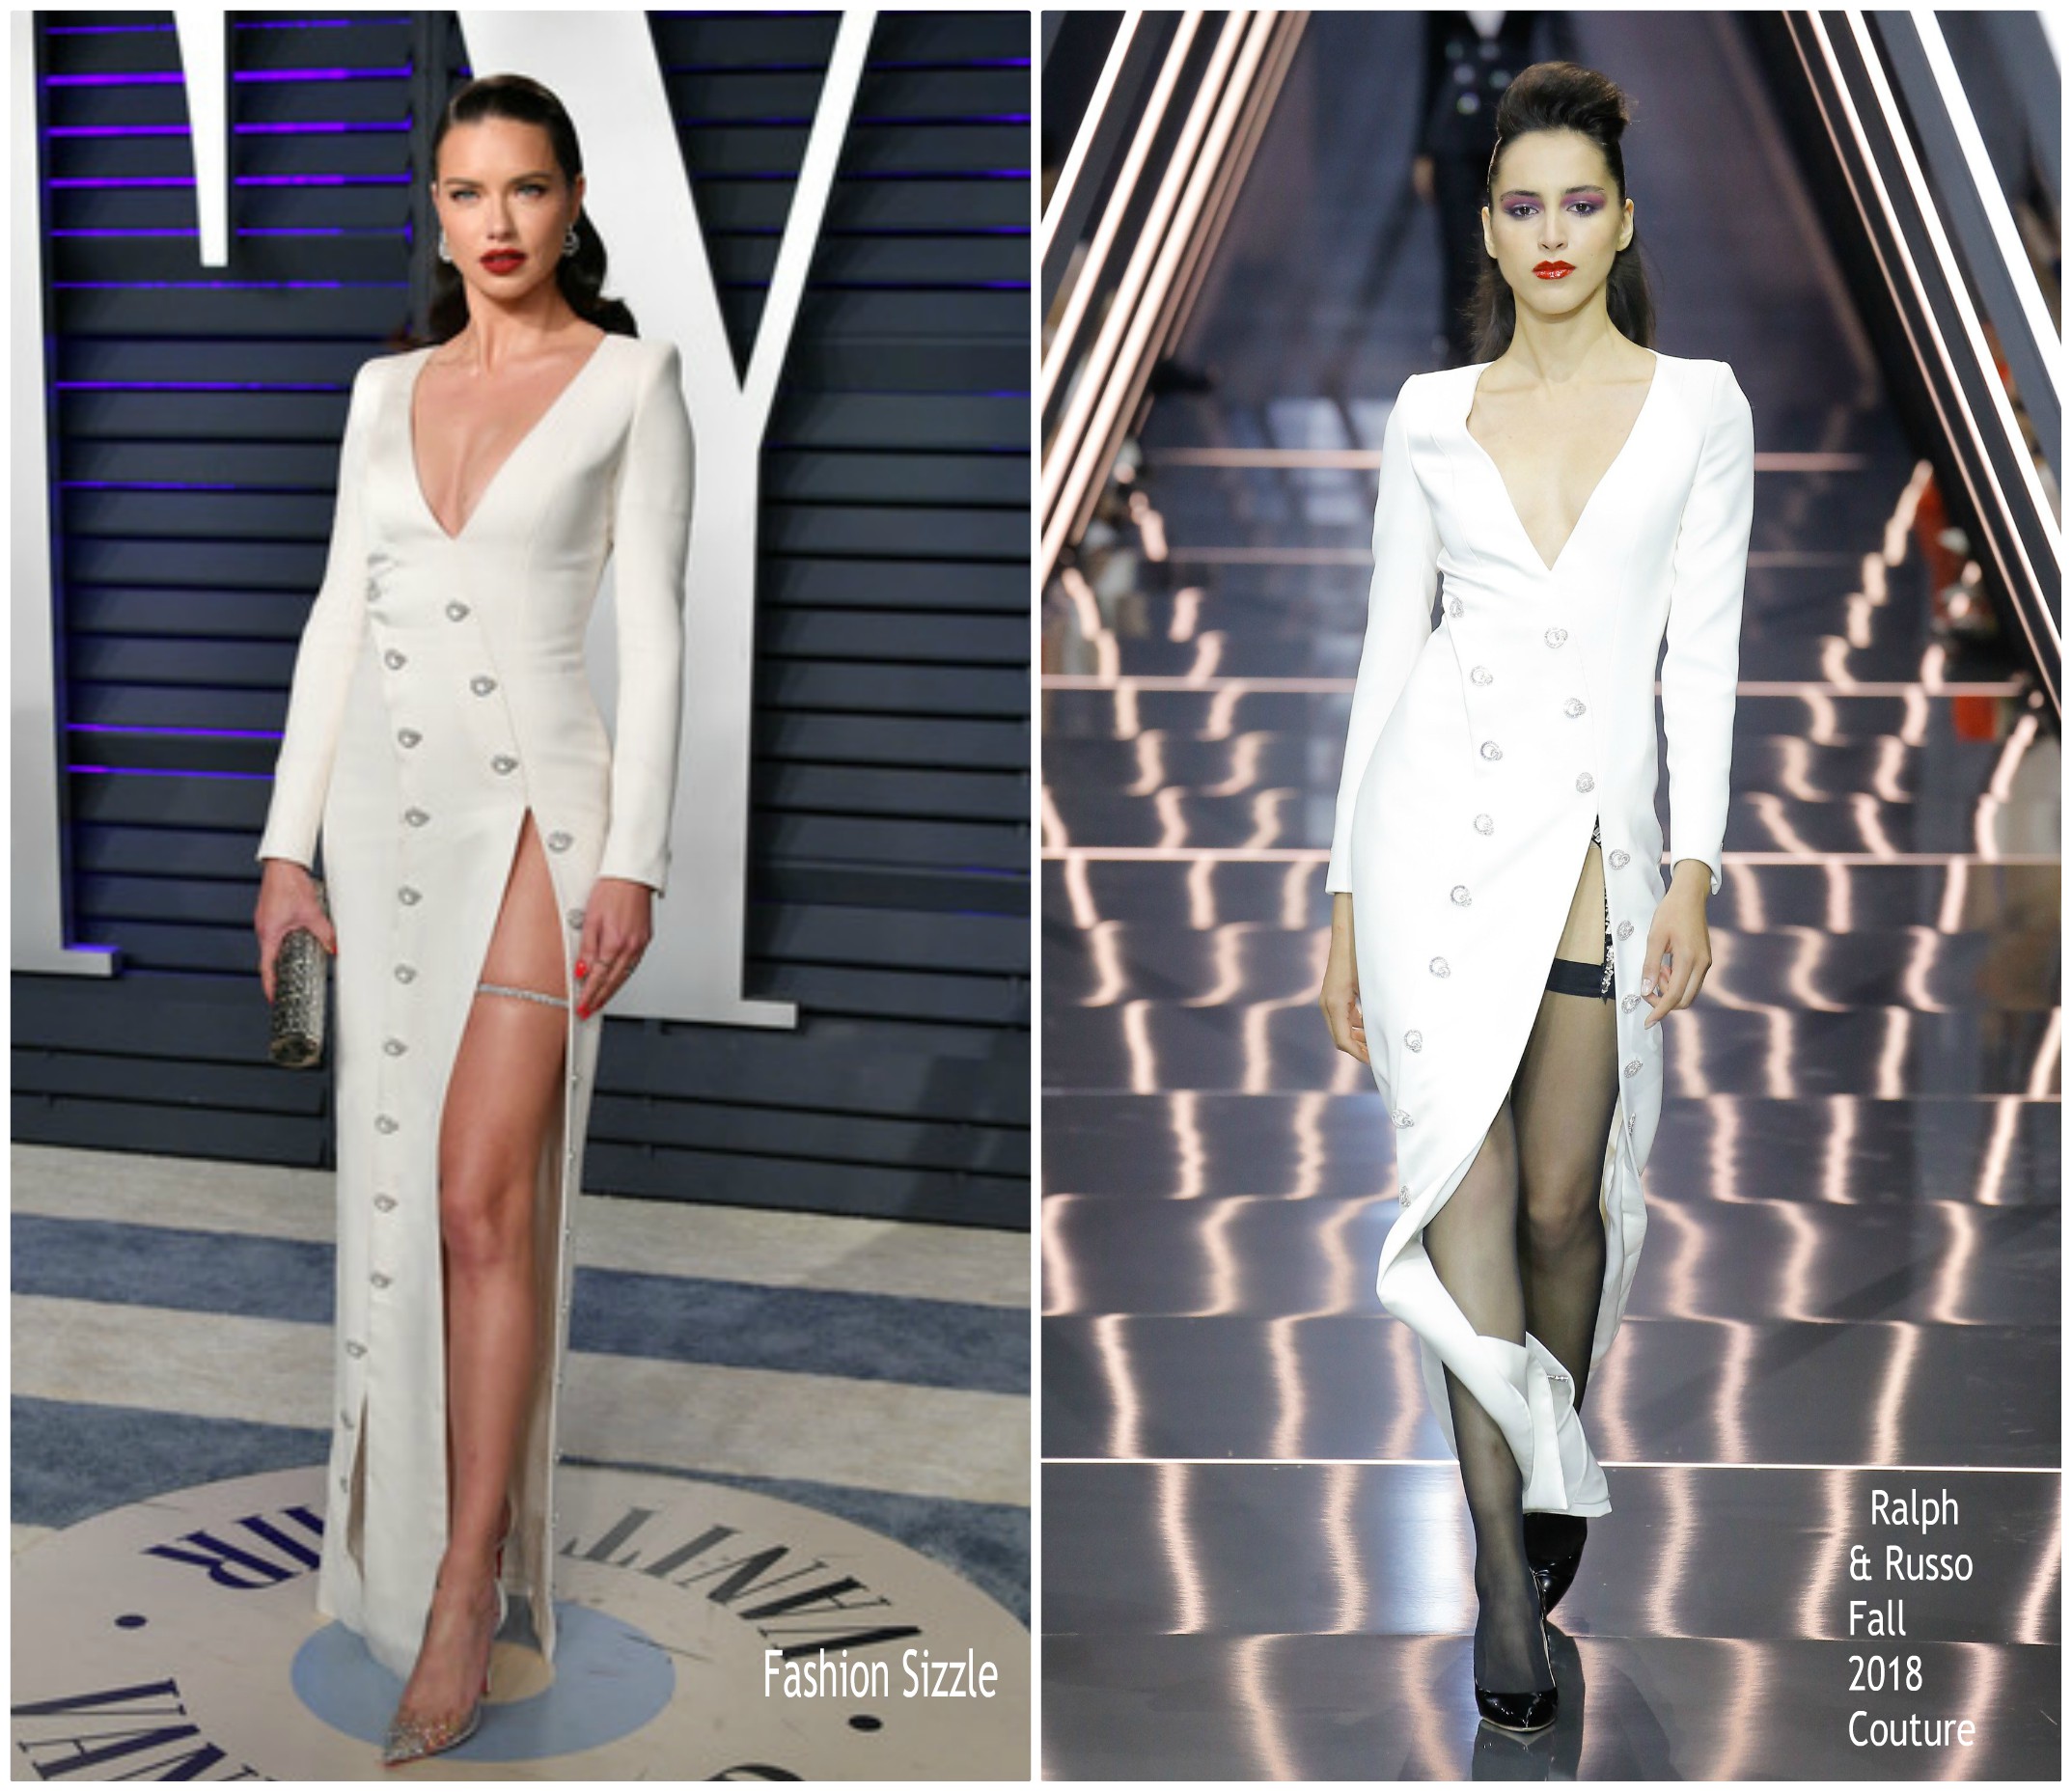 adriana-lima-in-ralph-russ0-couture-2019-vanity-fair-oscar-party